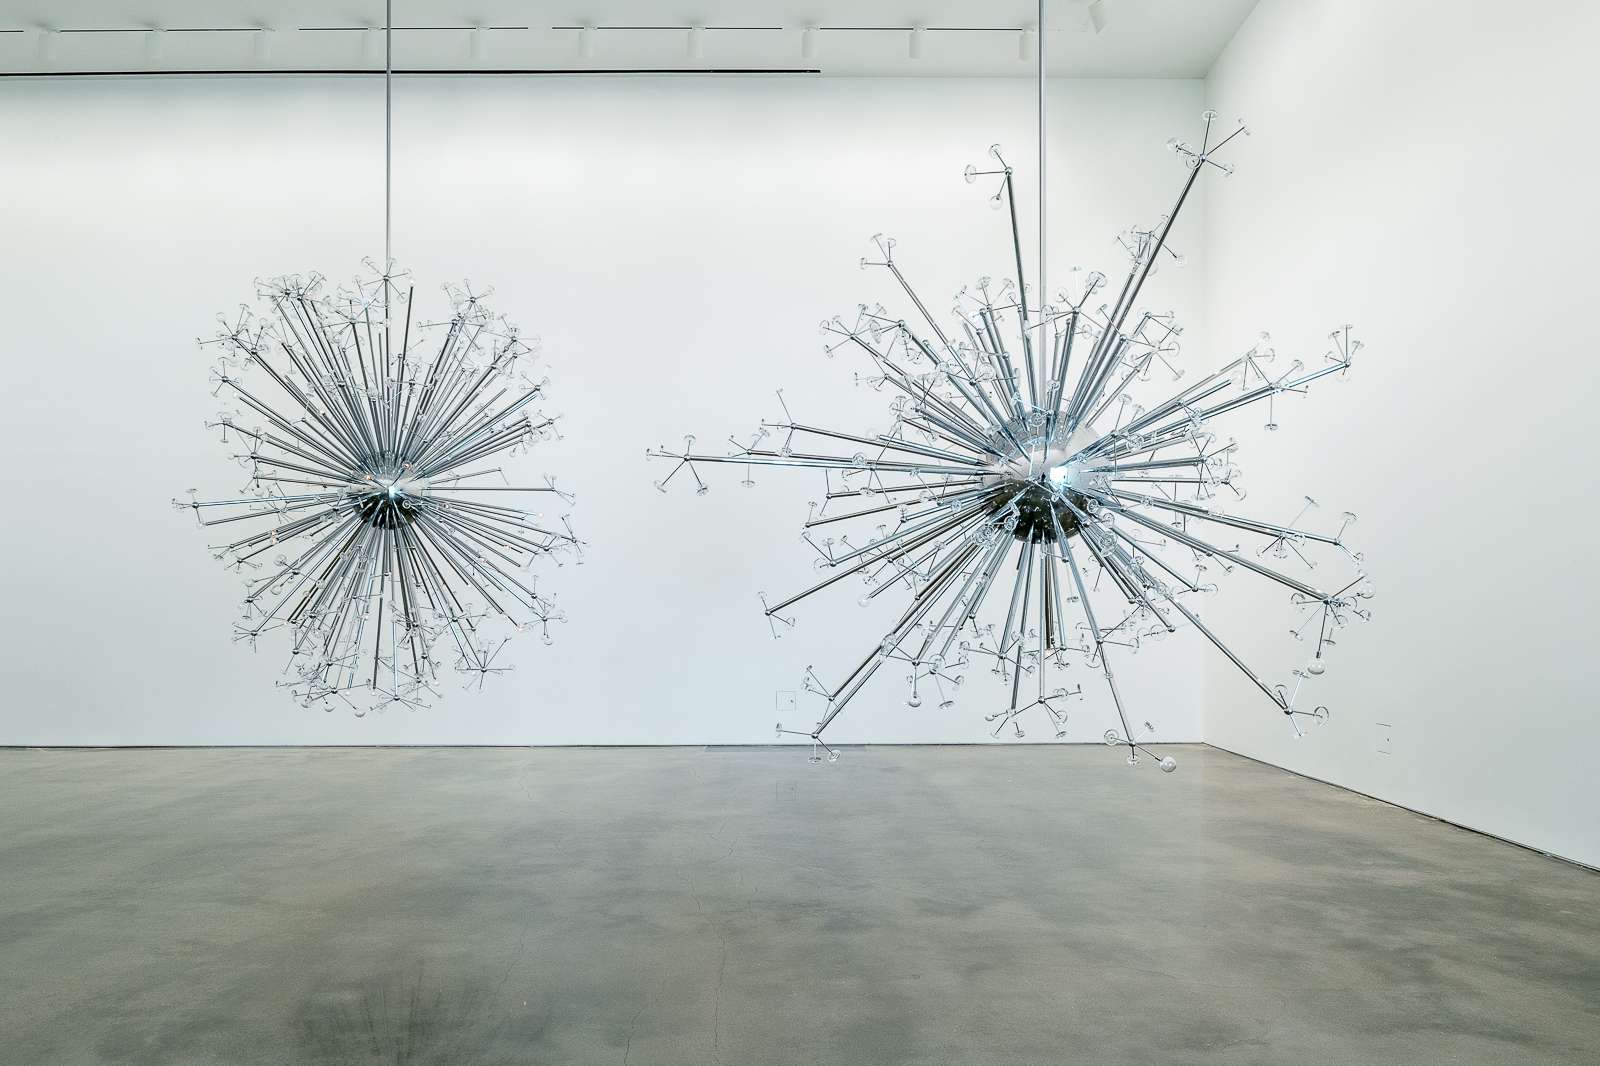 Installation view of Island Universe by Josiah McElheny, 2008. Chrome plated aluminum, handblown and molded glass, electric lighting, and rigging. Dimensions variable. Courtesy the artist. Photo: Nash Baker